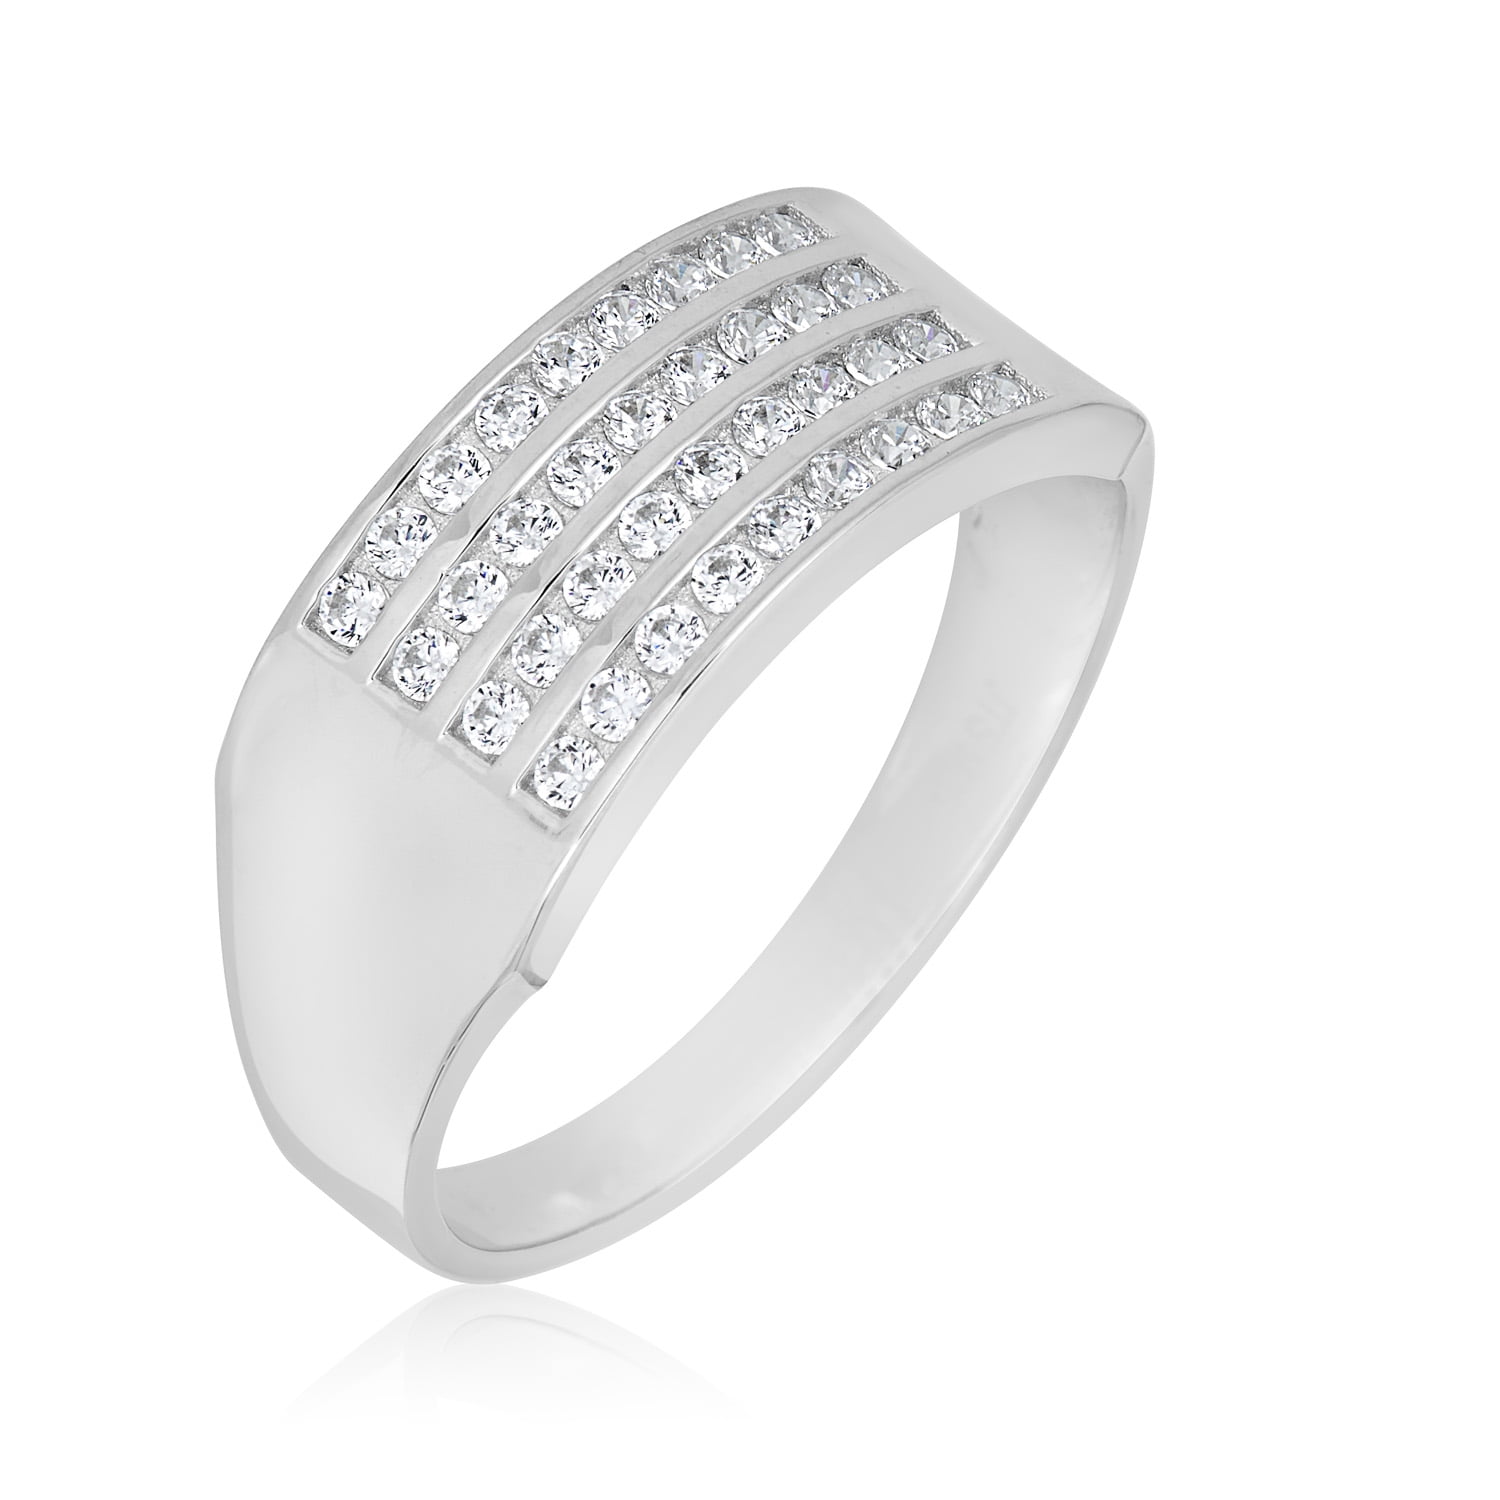 LADIES MEN'S 14K WHITE GOLD ON STERLING SILVER 4 ROW WEDDING CZ'S BAND RING 12MM